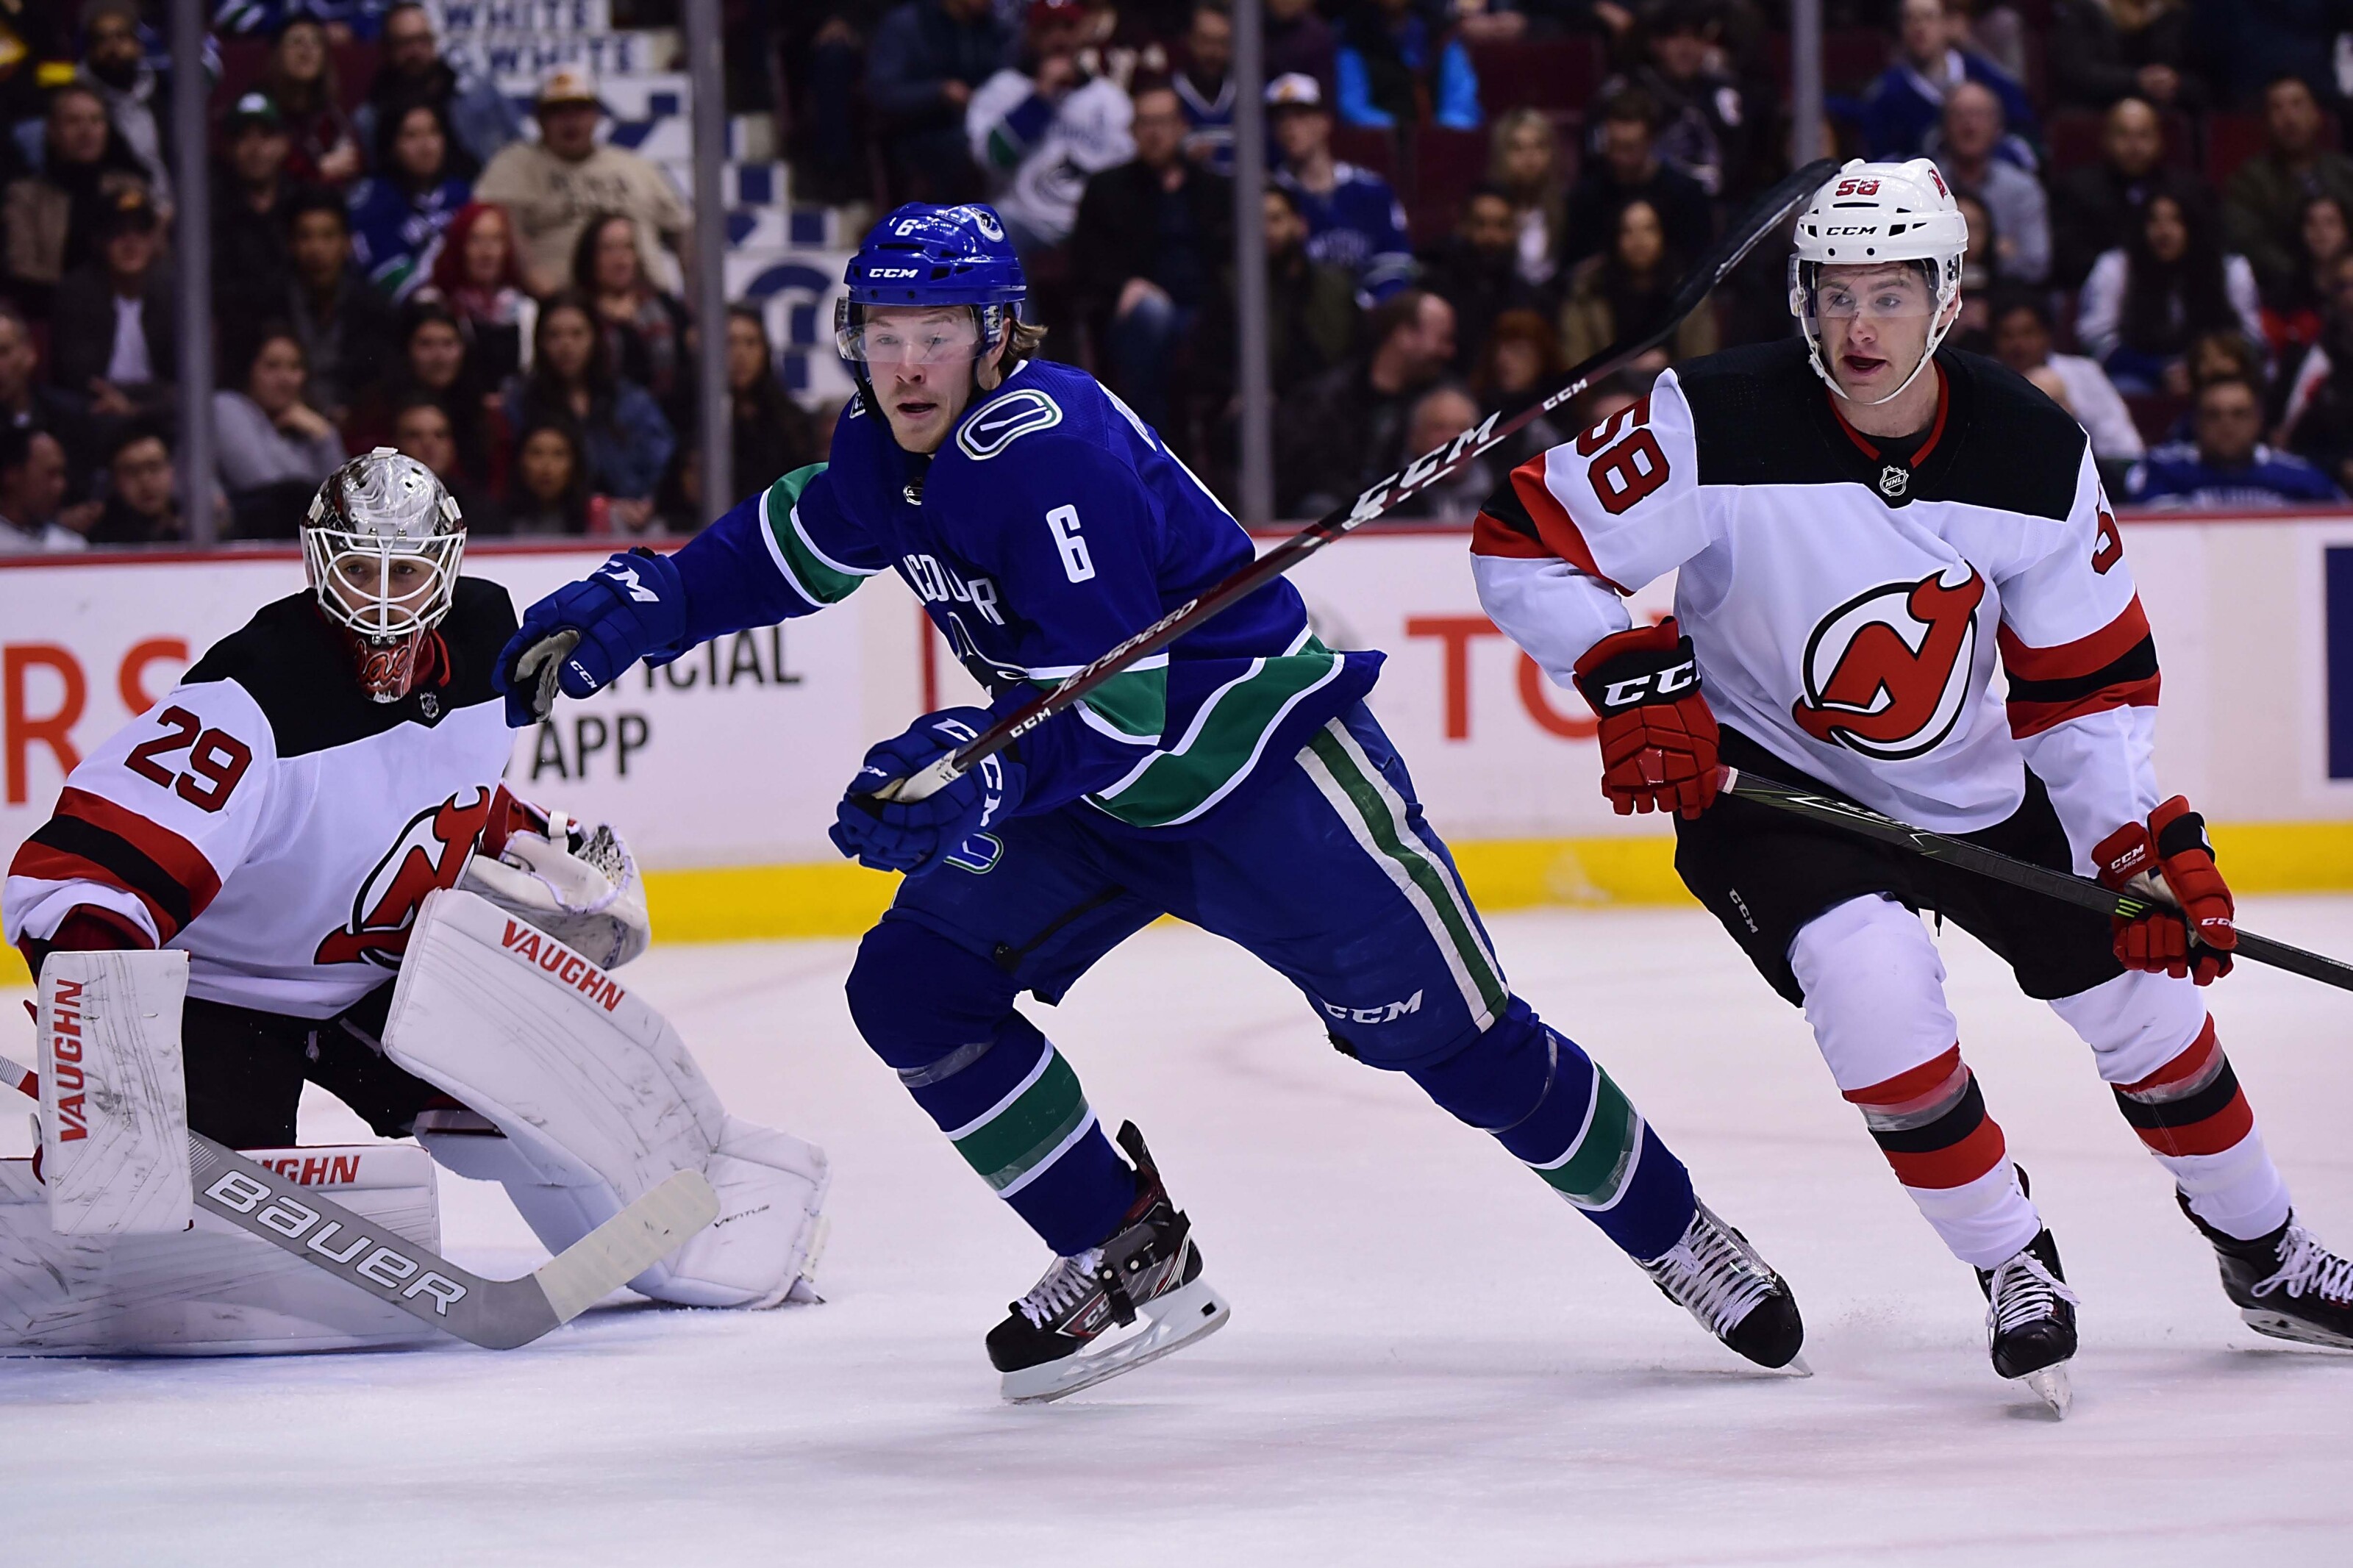 Will the Vancouver Canucks trade for Ethan Bear